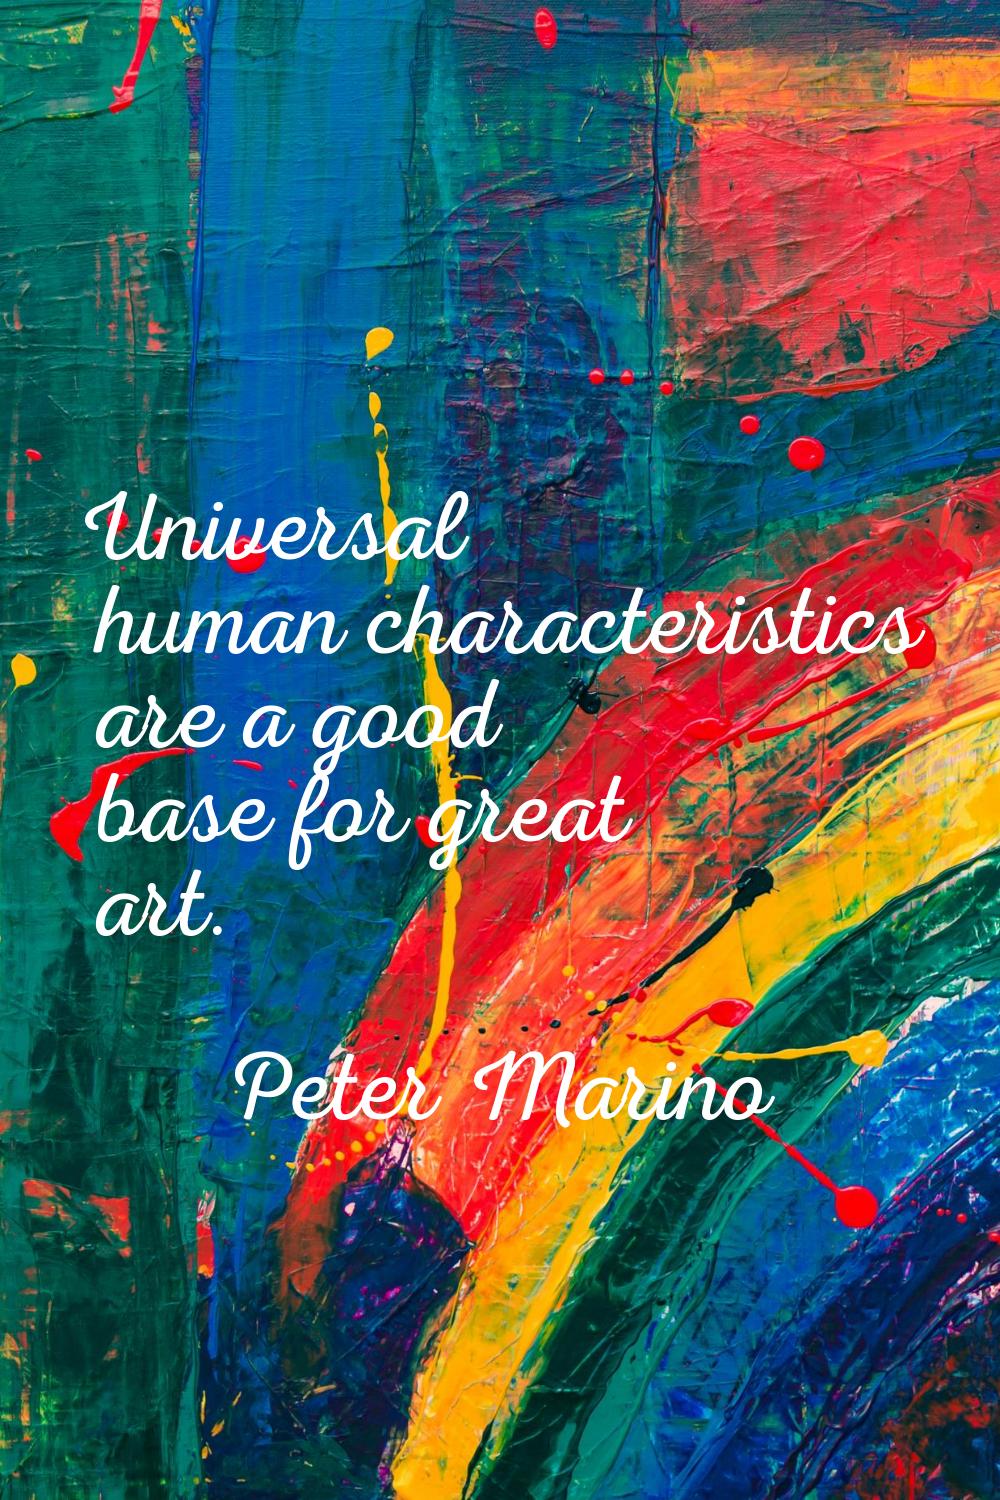 Universal human characteristics are a good base for great art.